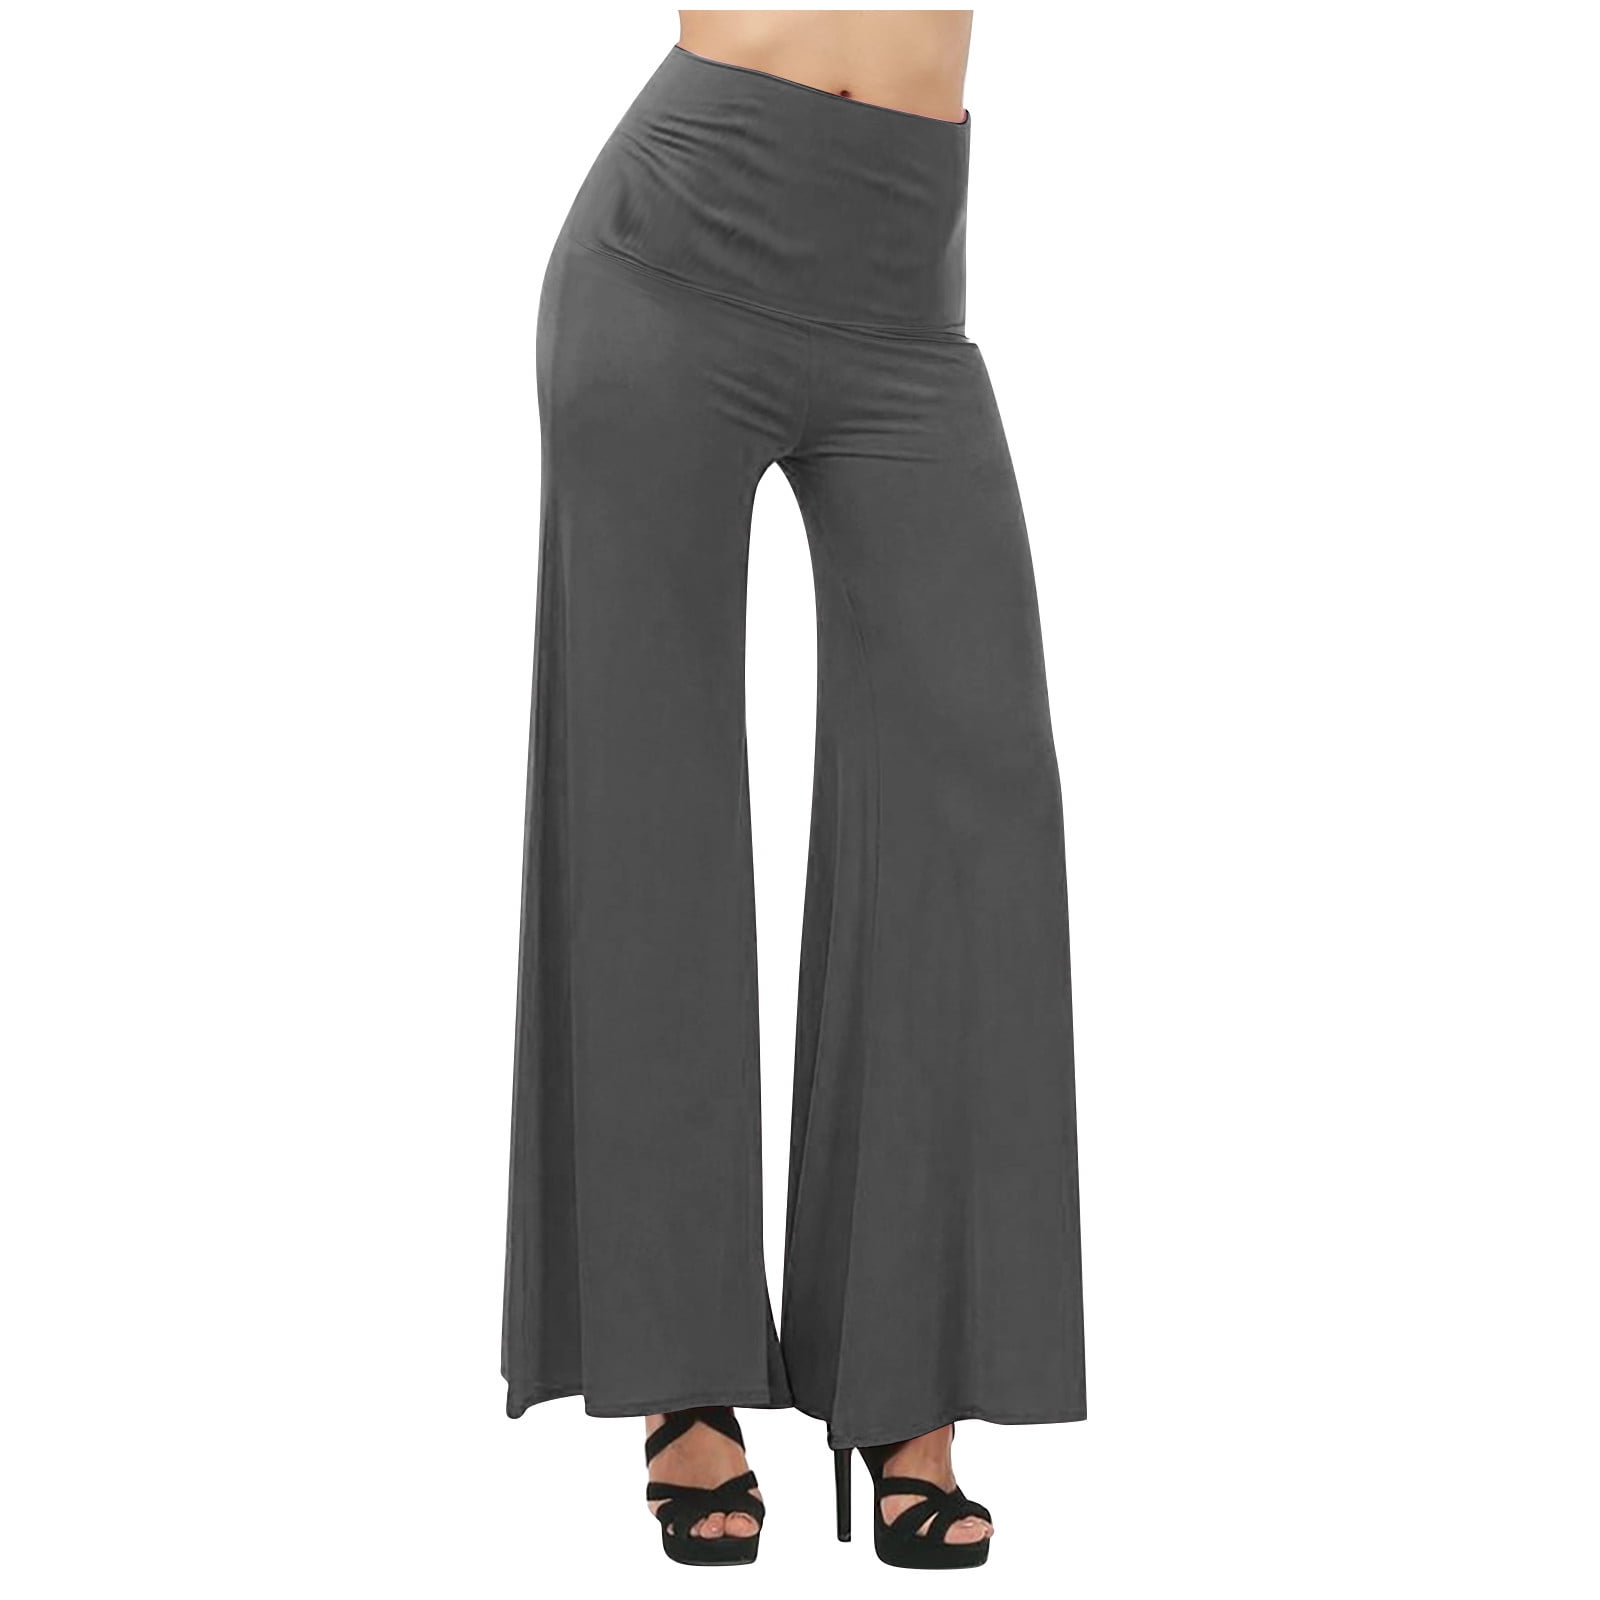  G4Free Yoga Pants For Women Wide Leg Dress Pants High Waist Stretchy  Flare Pants For Casual Work Business